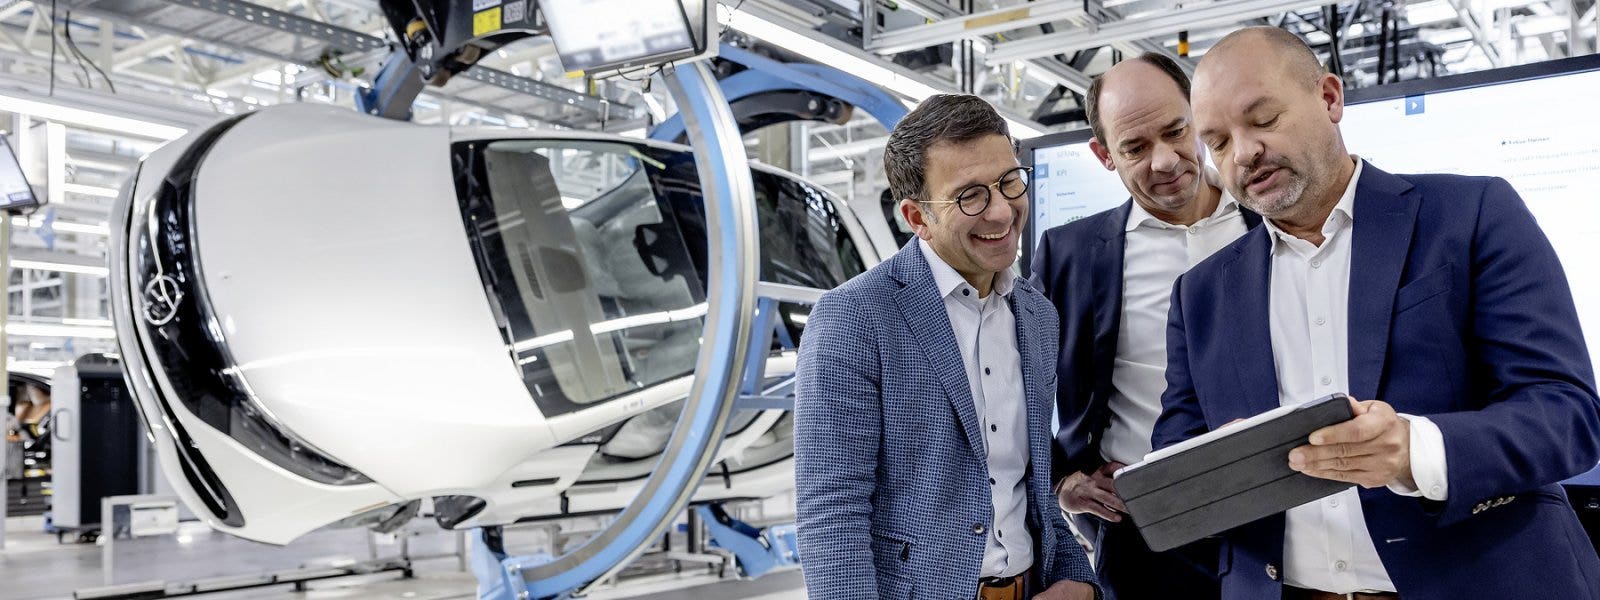 Mercedes-Benz Connects Passenger Car Plants To Microsoft Cloud - What's The Benefit?